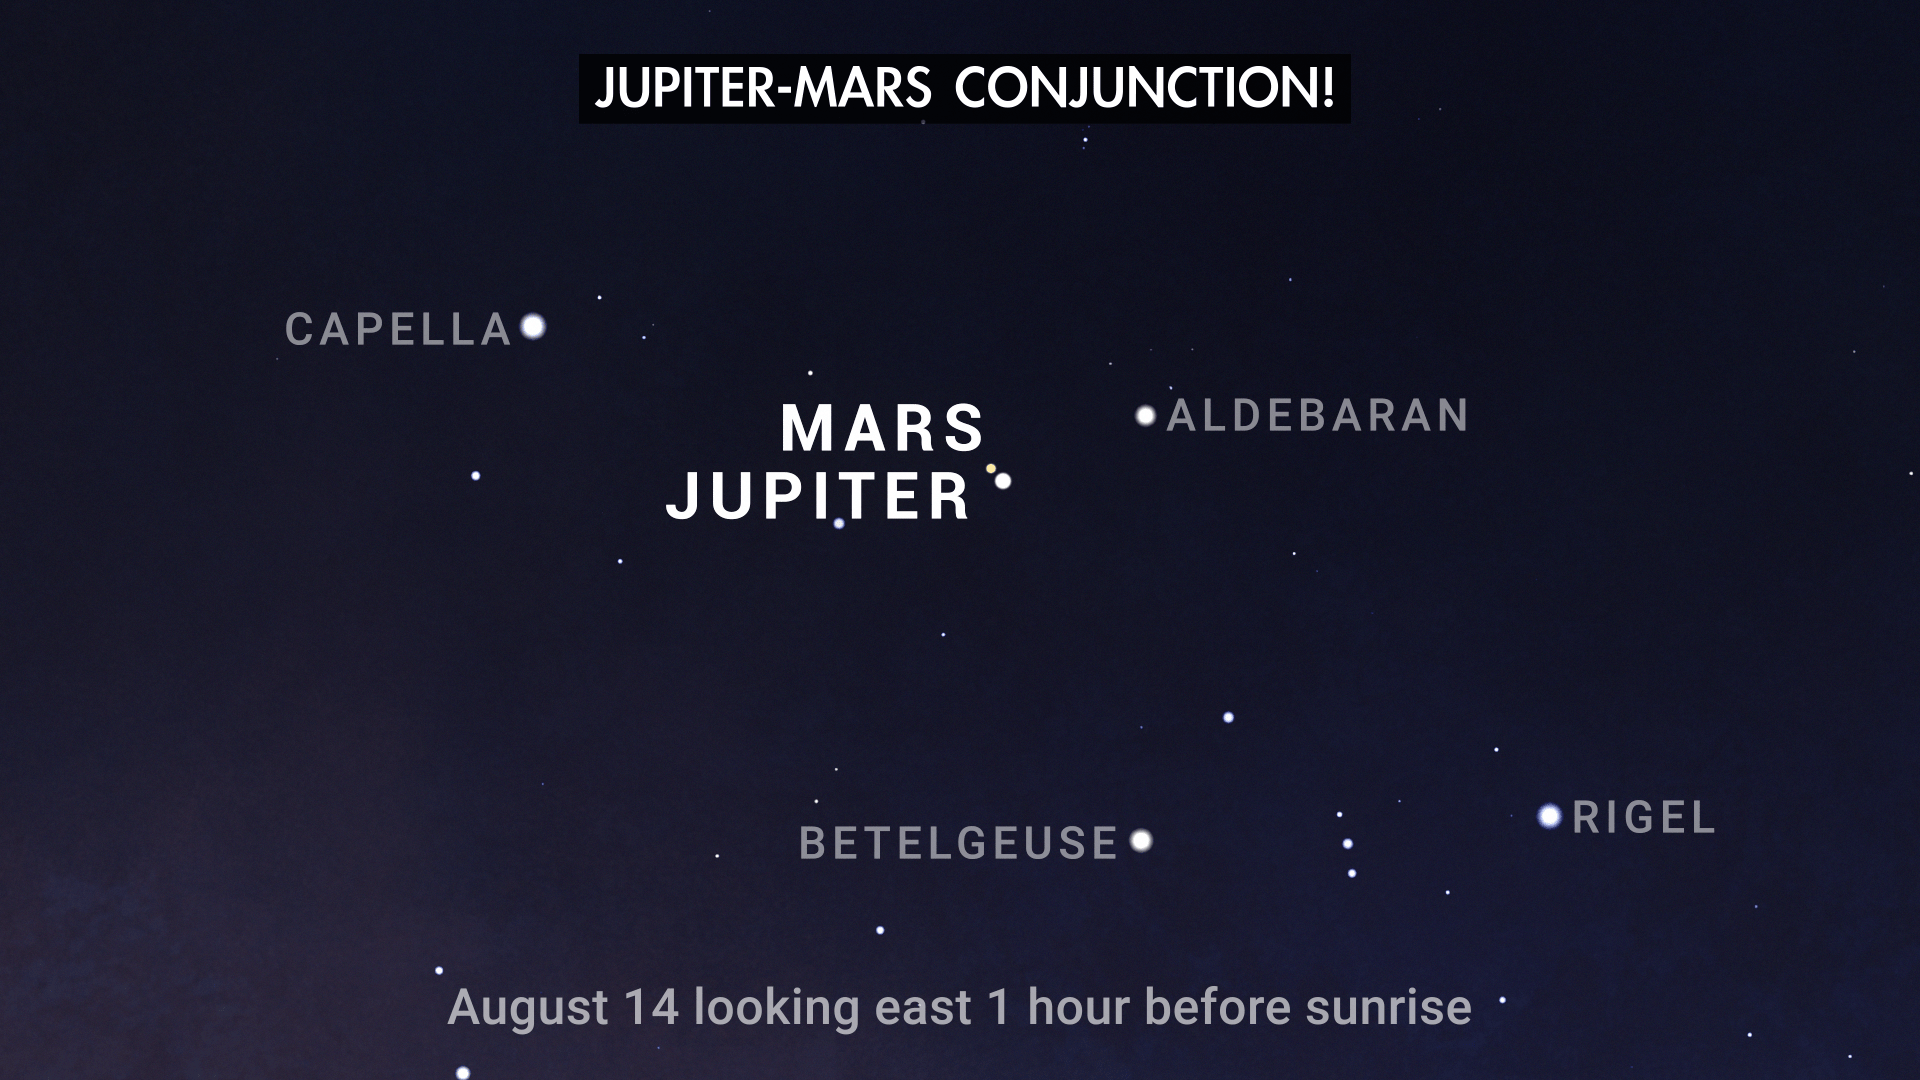 An illustrated sky chart shows the morning sky facing eastward, 1 hour before sunrise on August 14, 2024. Jupiter and Mars are pictured as small white dots very close together near center. Jupiter appears larger than Mars, indicating its greater brightness. Several other bright stars appear nearby in the sky.